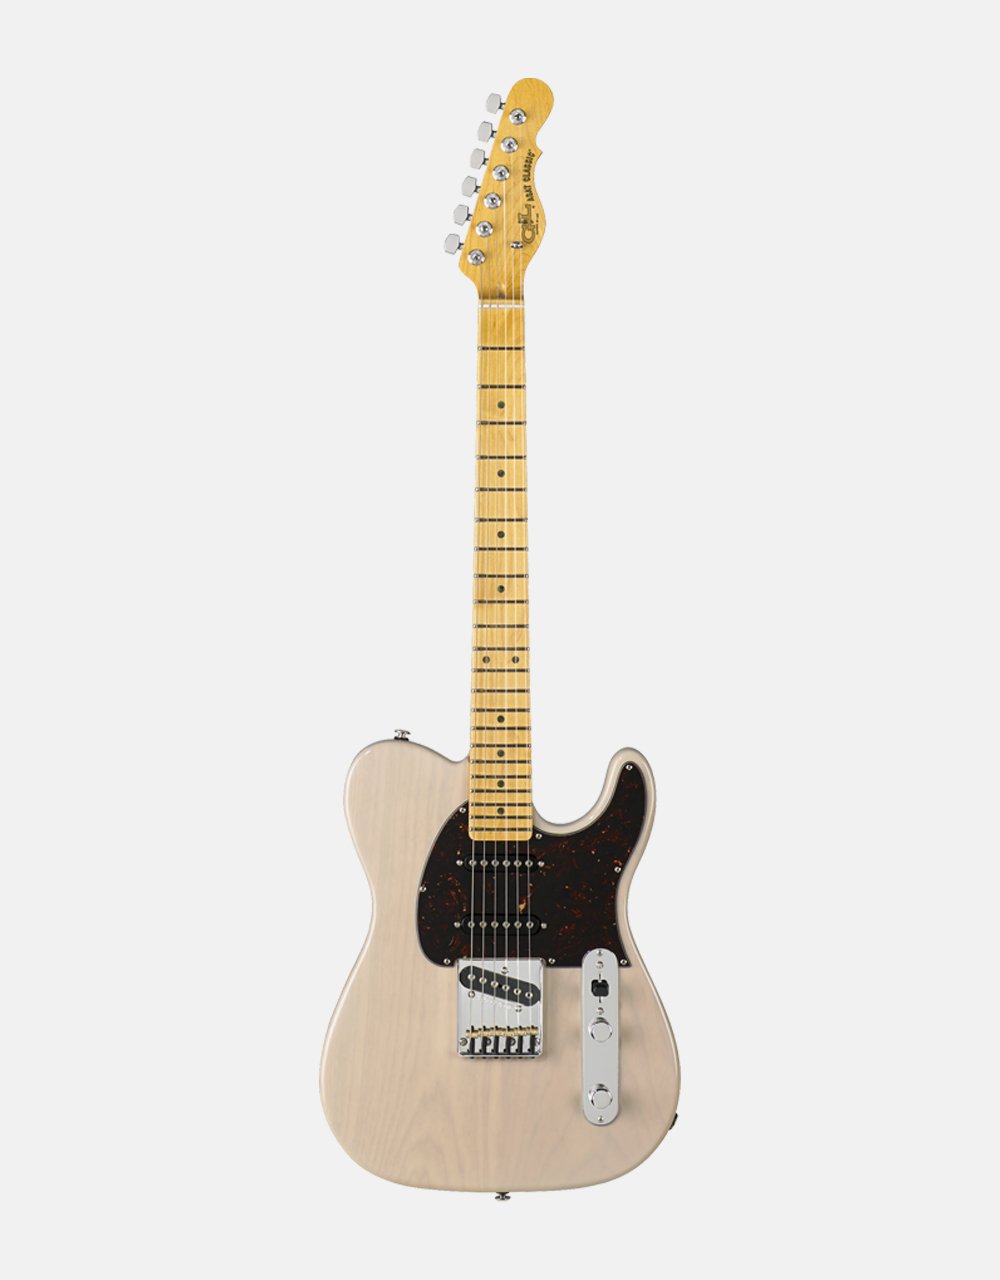 Build To Order ASAT® CLASSIC S | G&L Musical Instruments